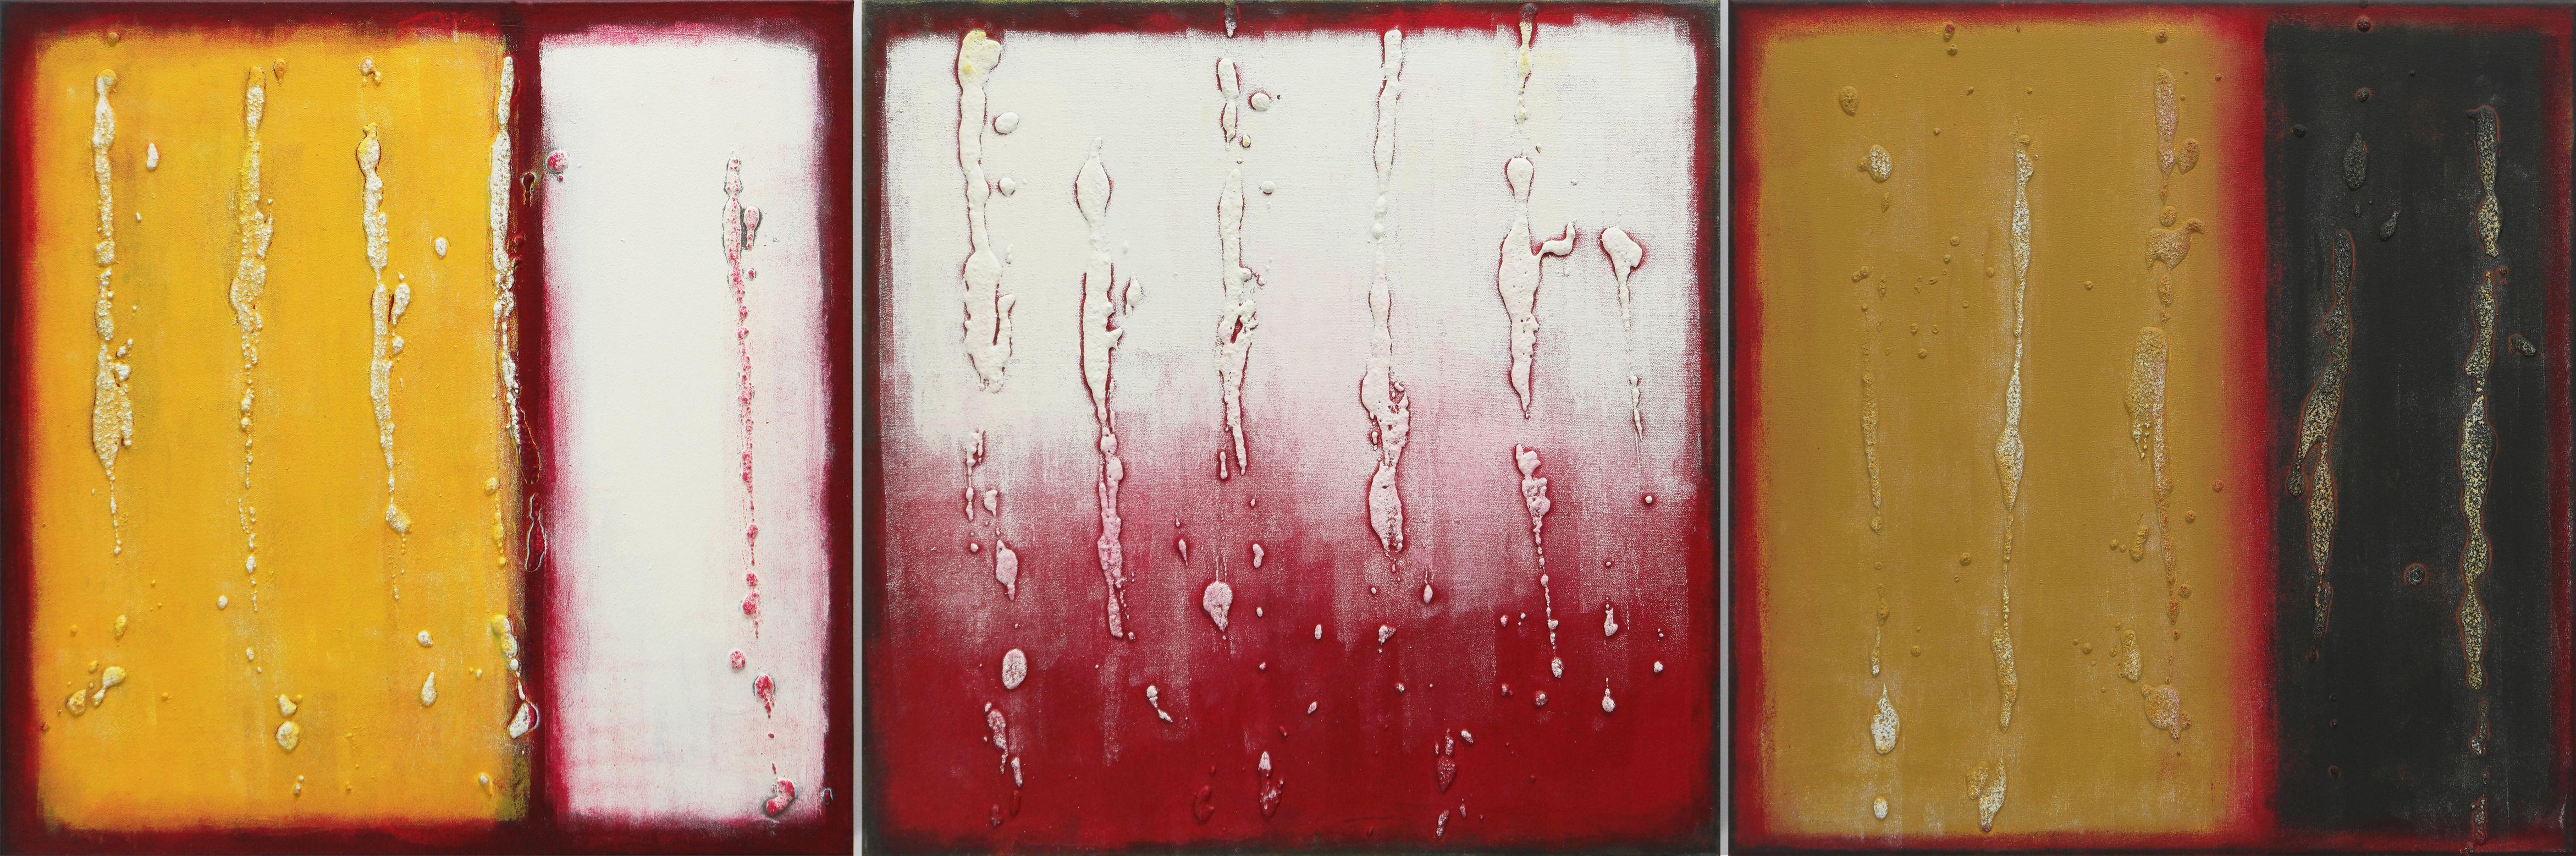 3 Reds - Triptych, Painting, Acrylic on Canvas